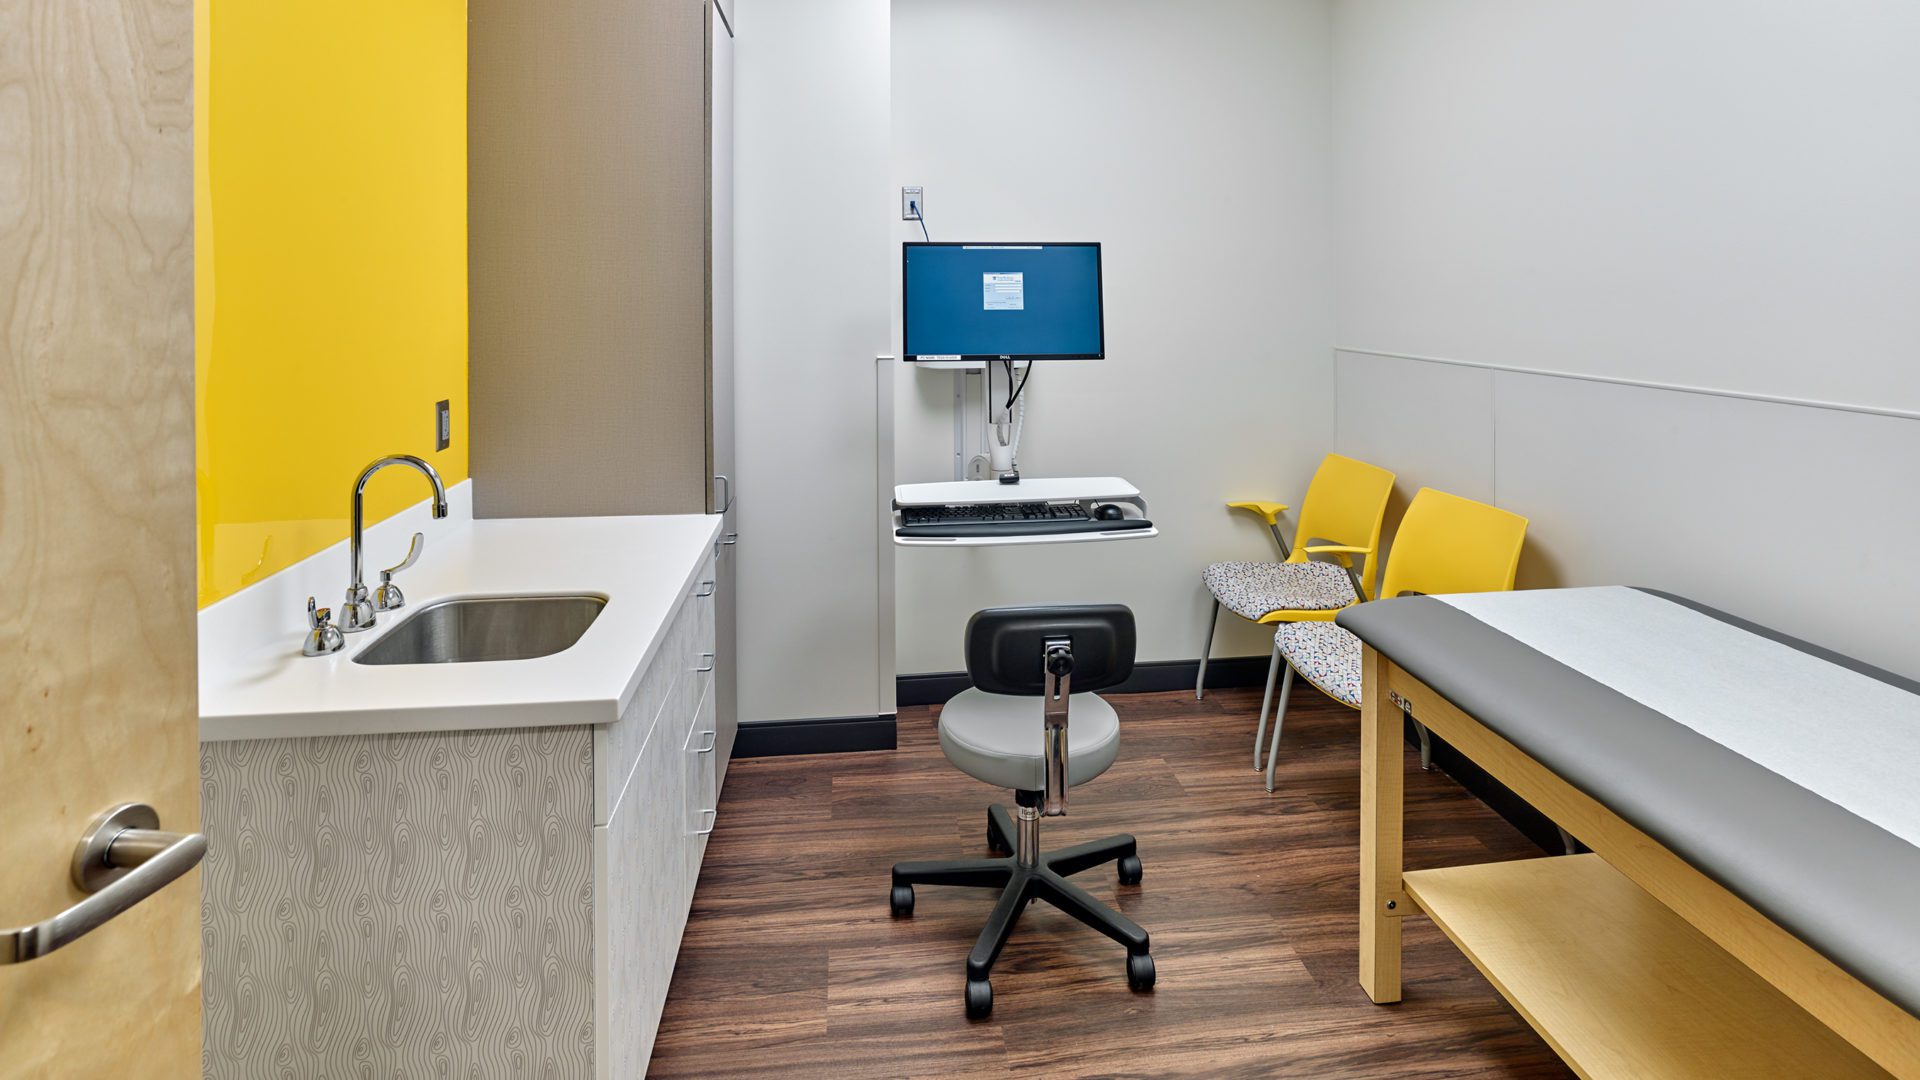 view of Roseville Examination Room. bright room with yellow accents